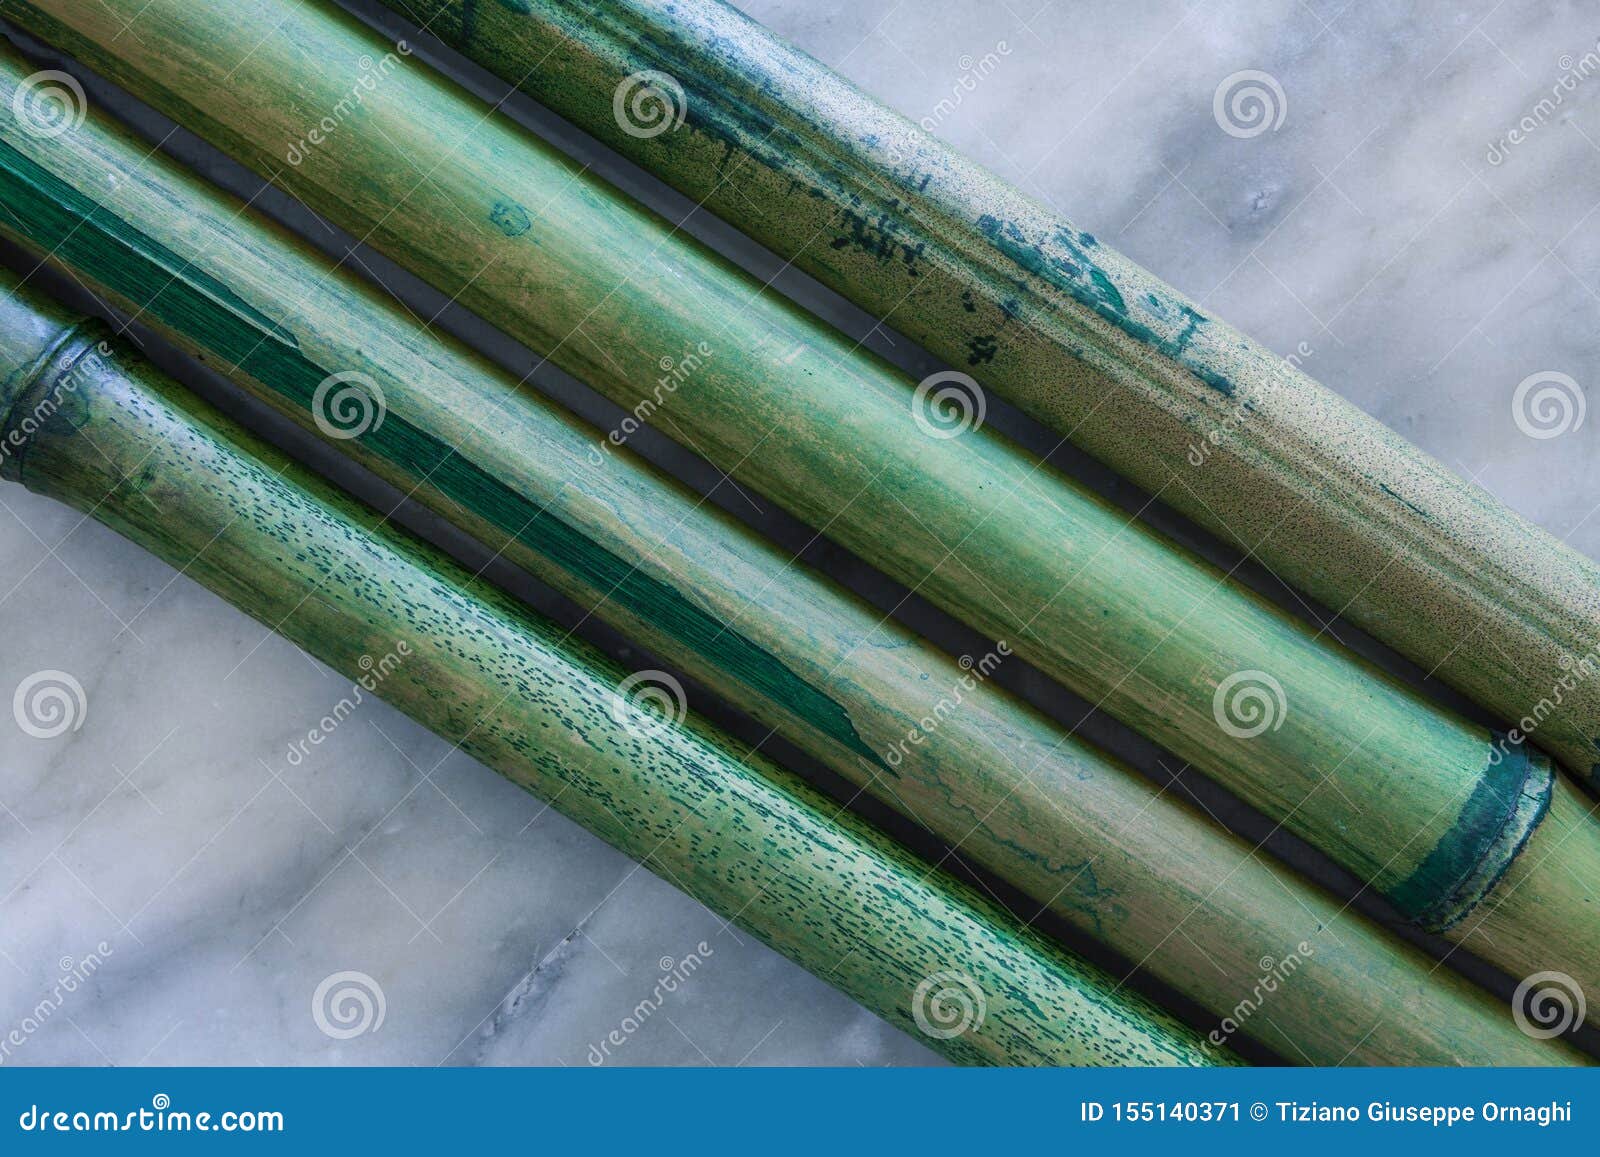 background composition with bamboo canes